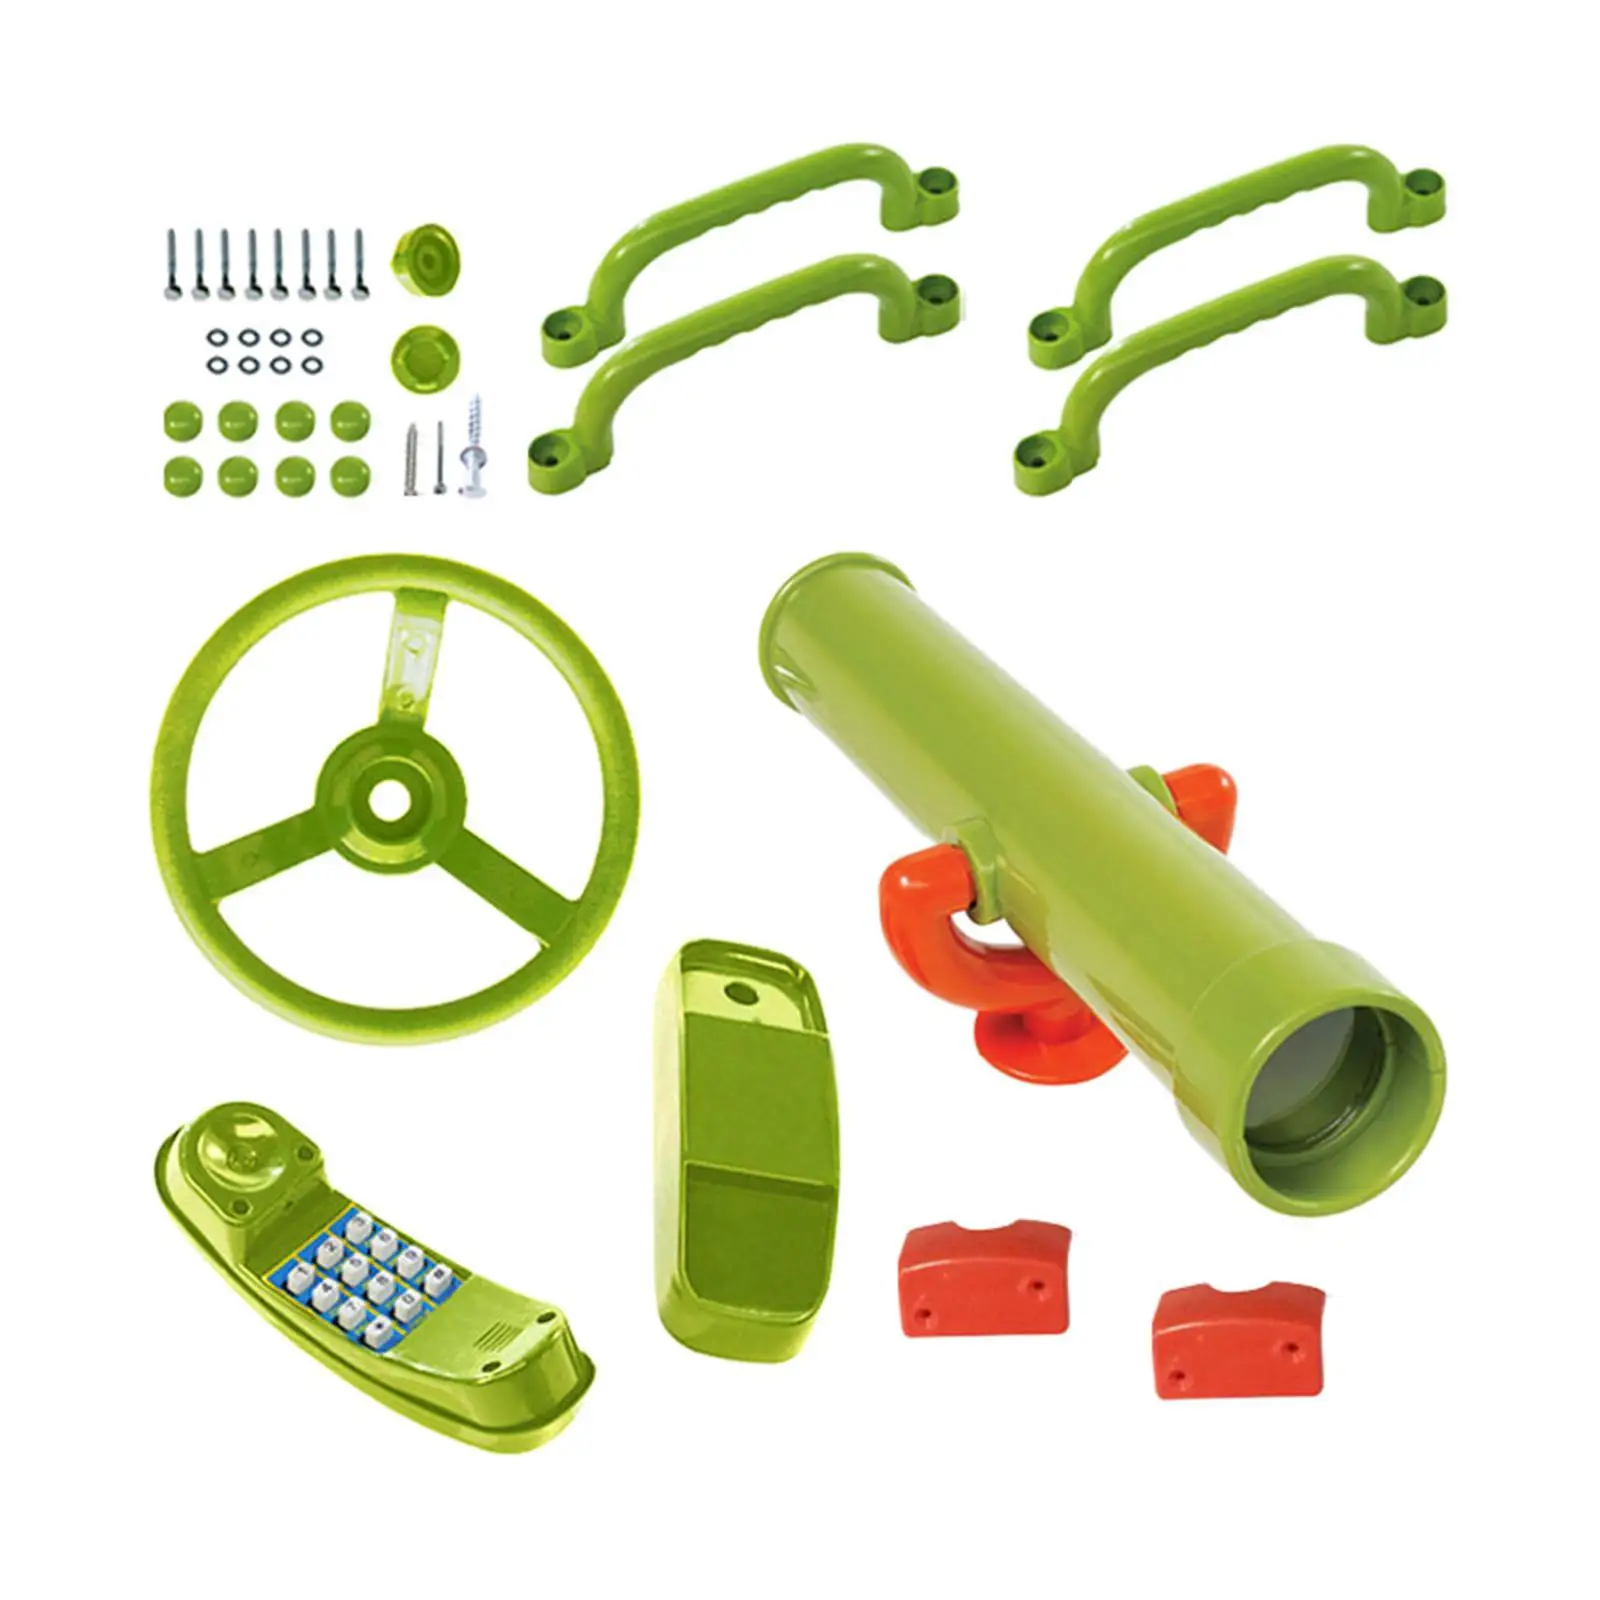 Outdoor Playset Toy Phone Steering Wheel Easy to Install Swing Set Attachments for Backyard treehouse